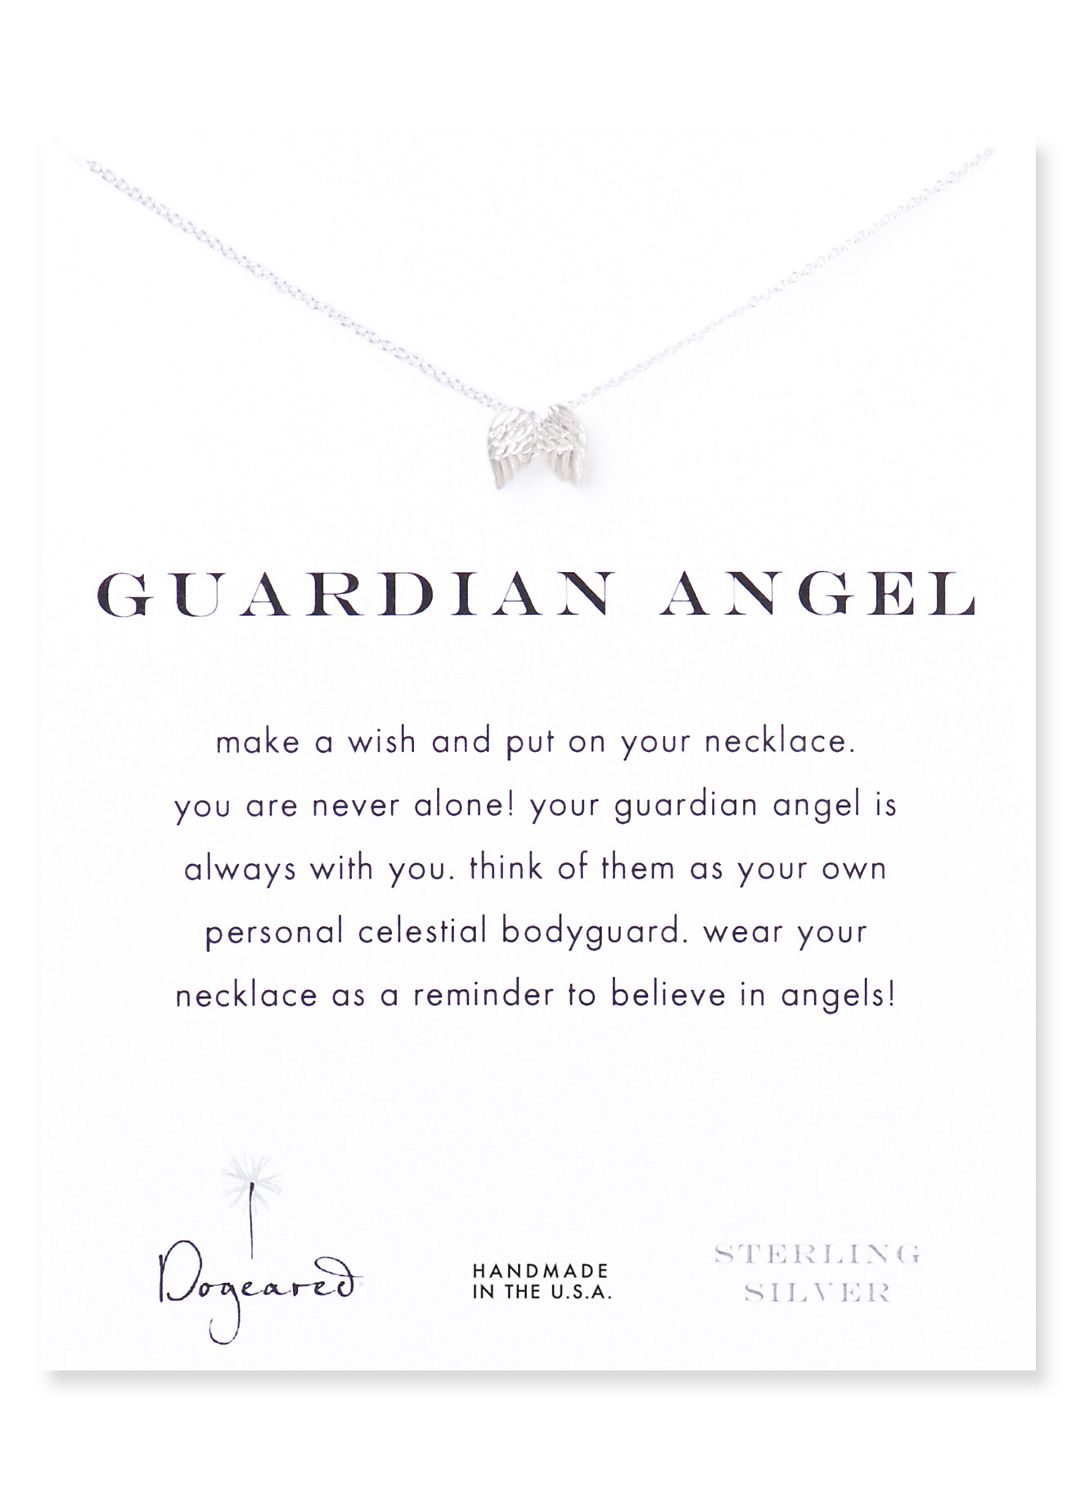 Guardian Angel Necklace Image 1